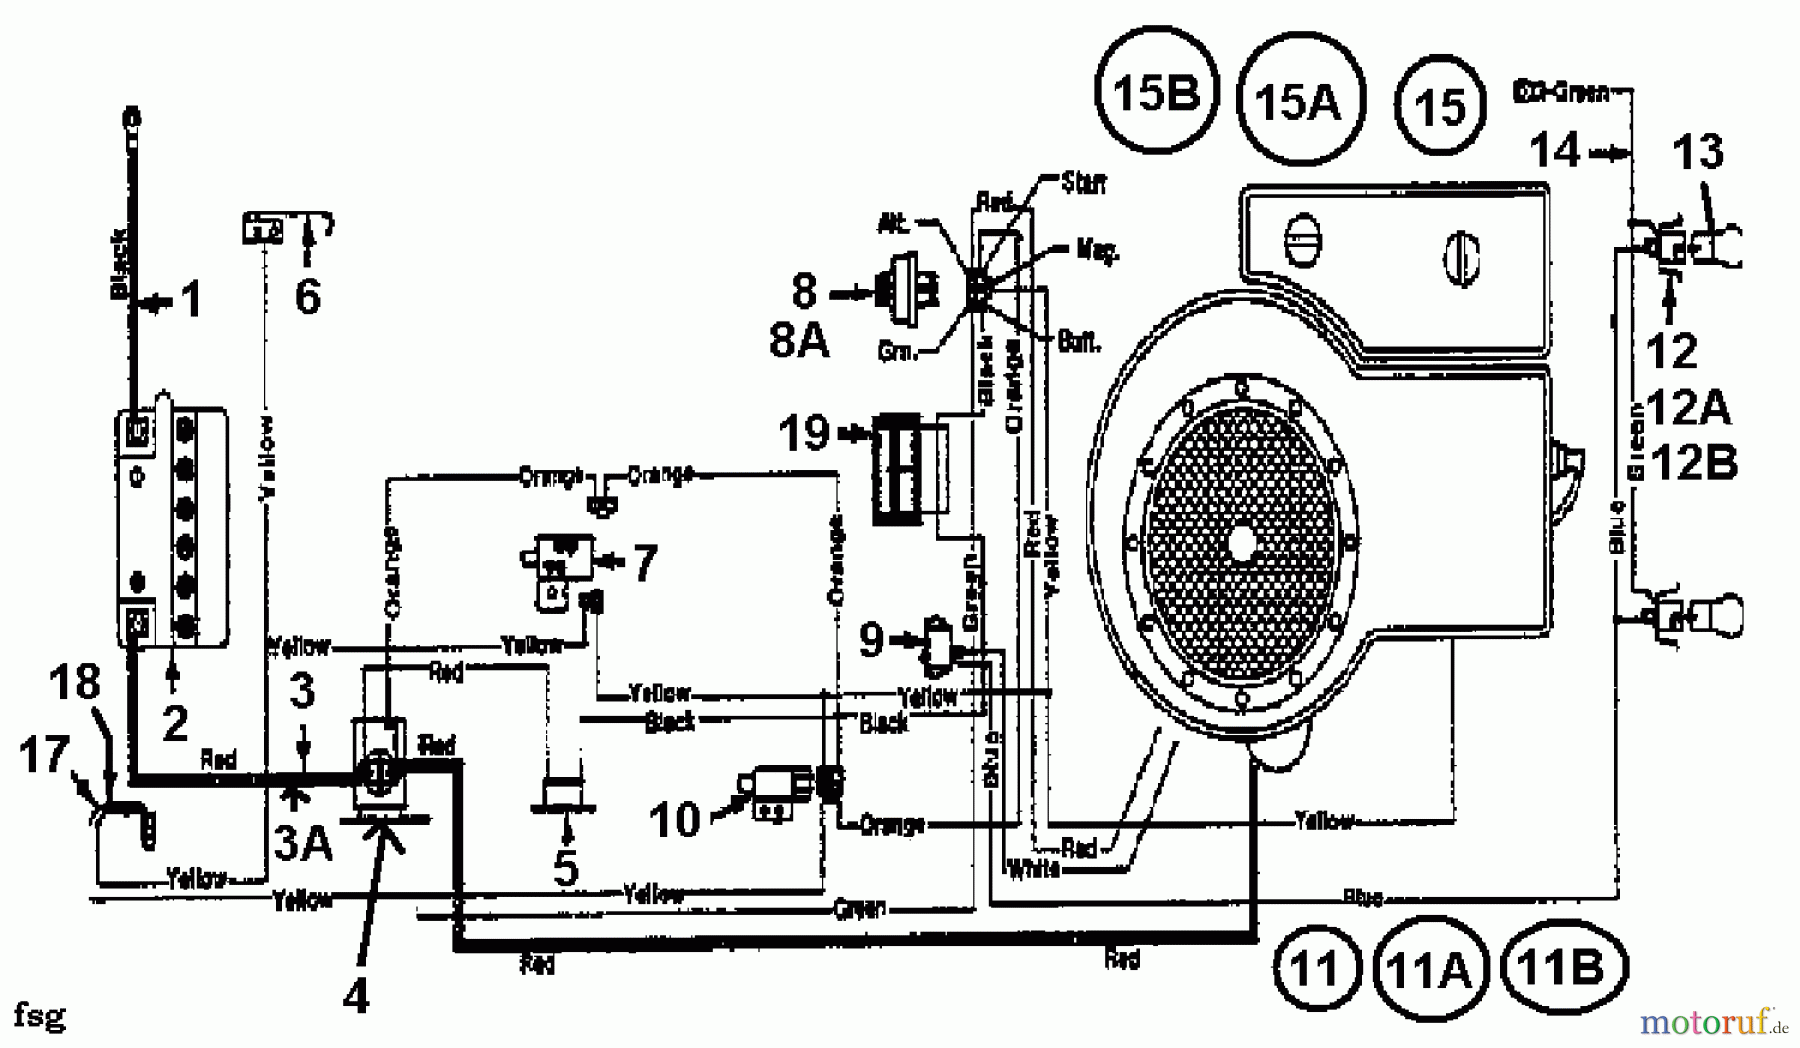  MTD Lawn tractors 12/36 133-470E600  (1993) Wiring diagram single cylinder